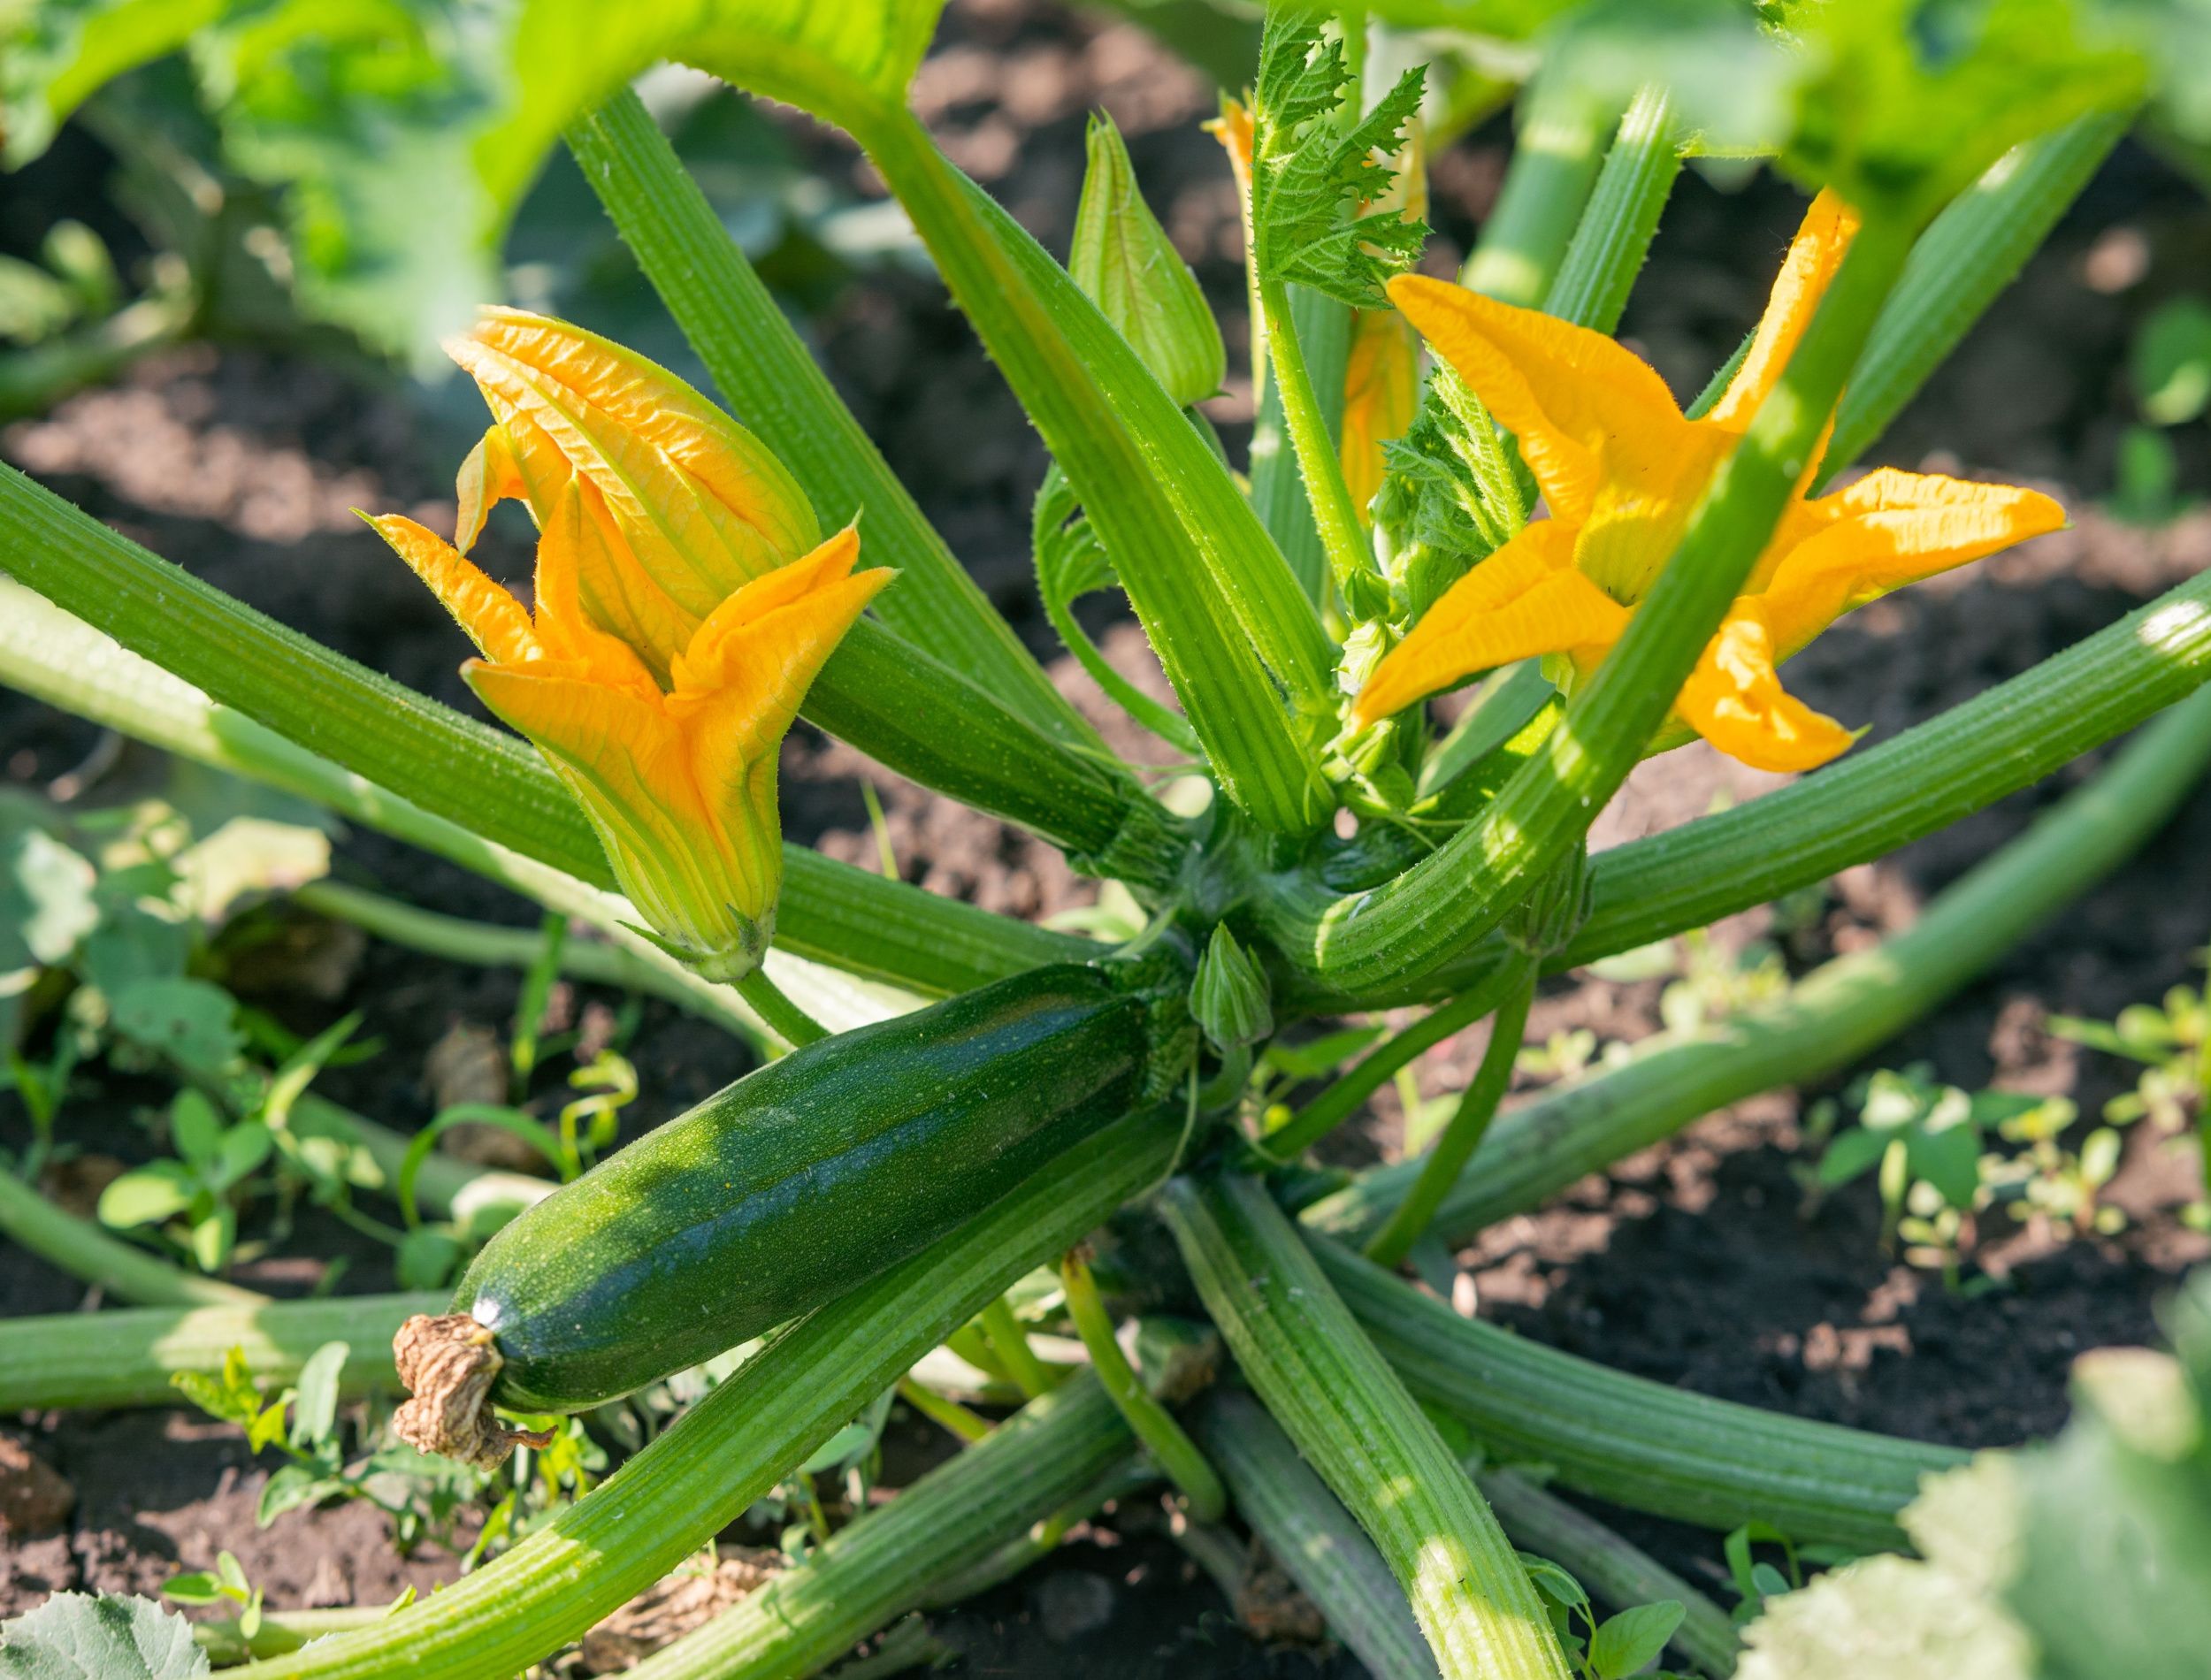 6 Common Zucchini Growing Problems to Watch For